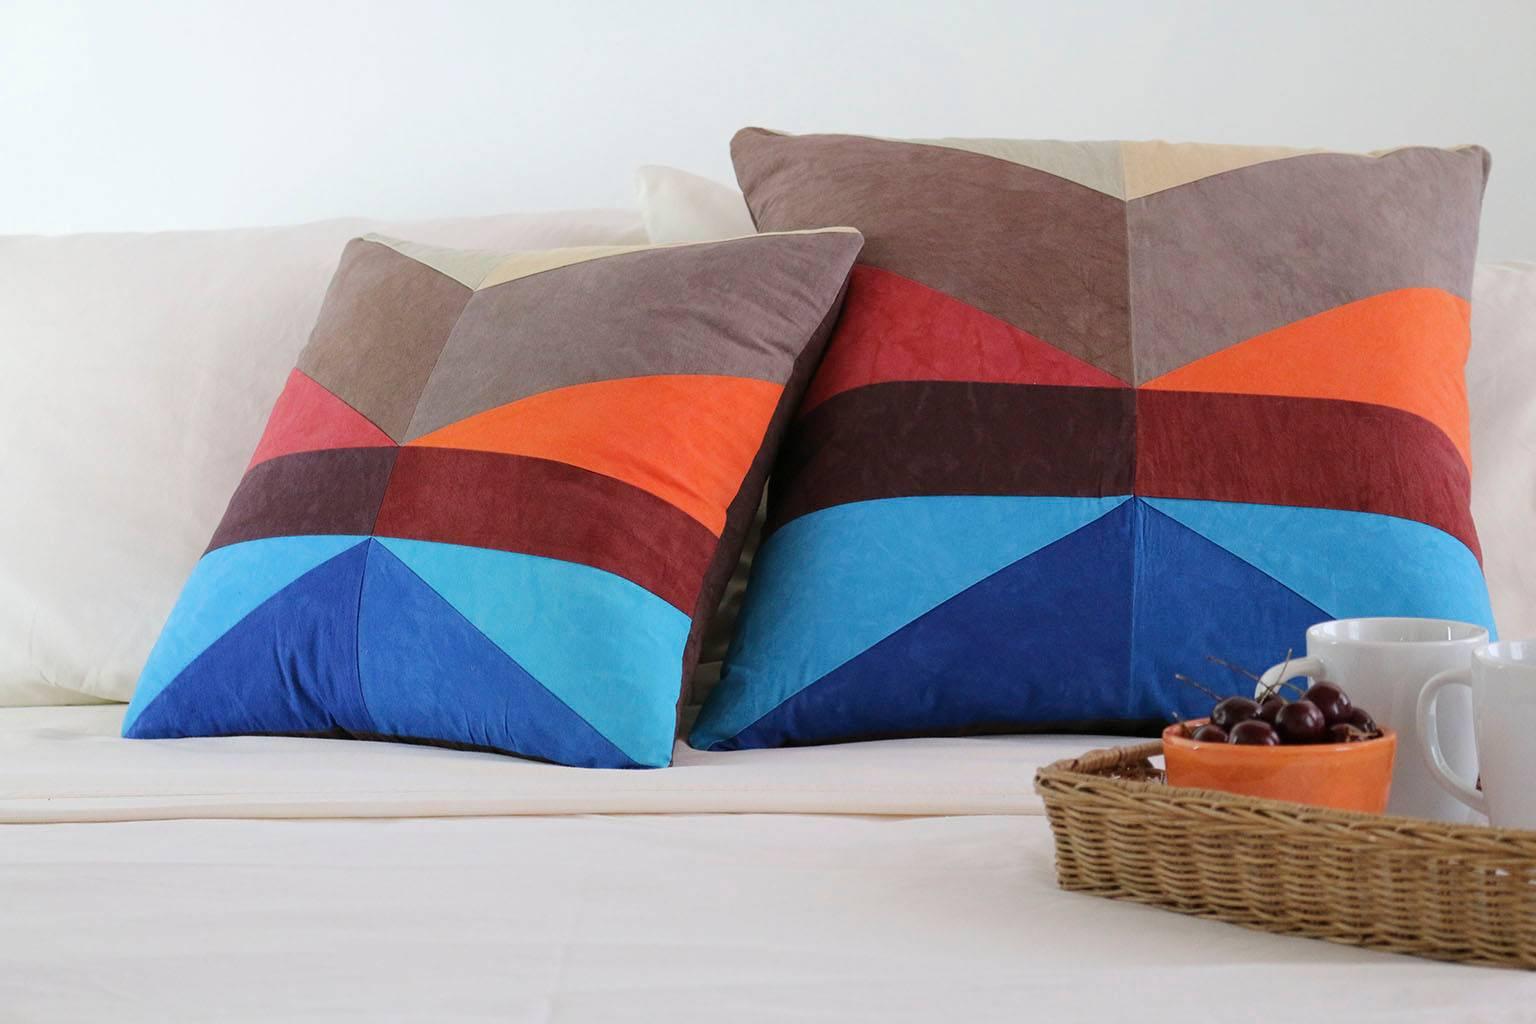 Vibrant New England colors in traditional American quilting patterns. 

With its distinct fabrics and careful, precise construction, each pillow is a stunning work of art. DUNN works closely with a fabric supplier and local quilter to craft these